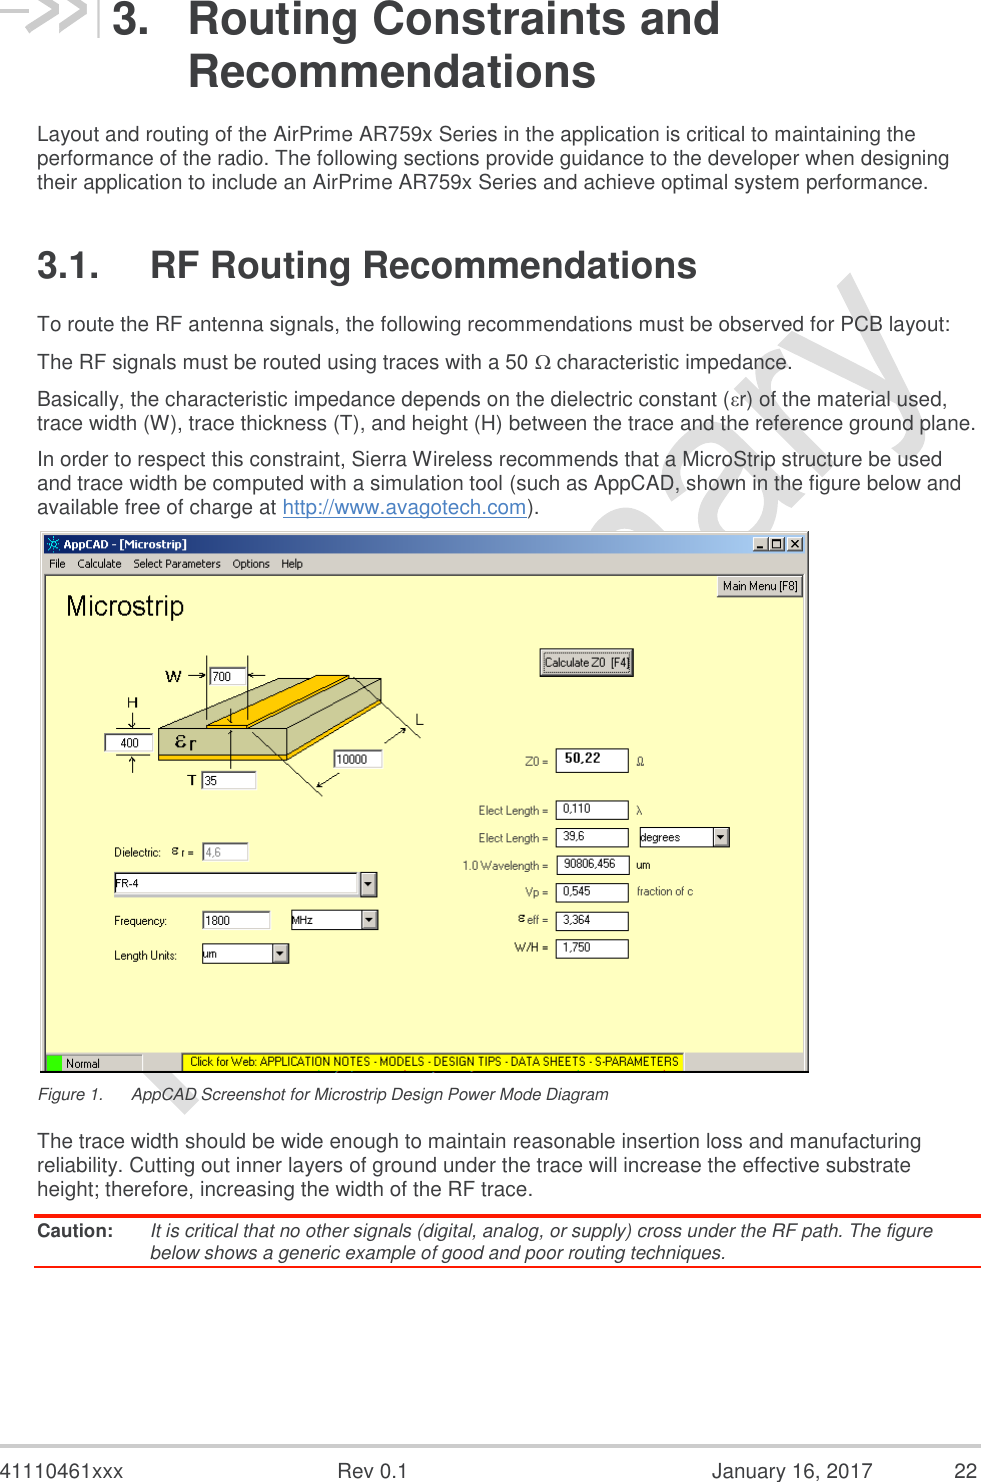  41110461xxx  Rev 0.1  January 16, 2017  22 3.  Routing Constraints and Recommendations Layout and routing of the AirPrime AR759x Series in the application is critical to maintaining the performance of the radio. The following sections provide guidance to the developer when designing their application to include an AirPrime AR759x Series and achieve optimal system performance. 3.1.  RF Routing Recommendations To route the RF antenna signals, the following recommendations must be observed for PCB layout: The RF signals must be routed using traces with a 50  characteristic impedance. Basically, the characteristic impedance depends on the dielectric constant (εr) of the material used, trace width (W), trace thickness (T), and height (H) between the trace and the reference ground plane. In order to respect this constraint, Sierra Wireless recommends that a MicroStrip structure be used and trace width be computed with a simulation tool (such as AppCAD, shown in the figure below and available free of charge at http://www.avagotech.com).  Figure 1.  AppCAD Screenshot for Microstrip Design Power Mode Diagram The trace width should be wide enough to maintain reasonable insertion loss and manufacturing reliability. Cutting out inner layers of ground under the trace will increase the effective substrate height; therefore, increasing the width of the RF trace. Caution:  It is critical that no other signals (digital, analog, or supply) cross under the RF path. The figure below shows a generic example of good and poor routing techniques. 